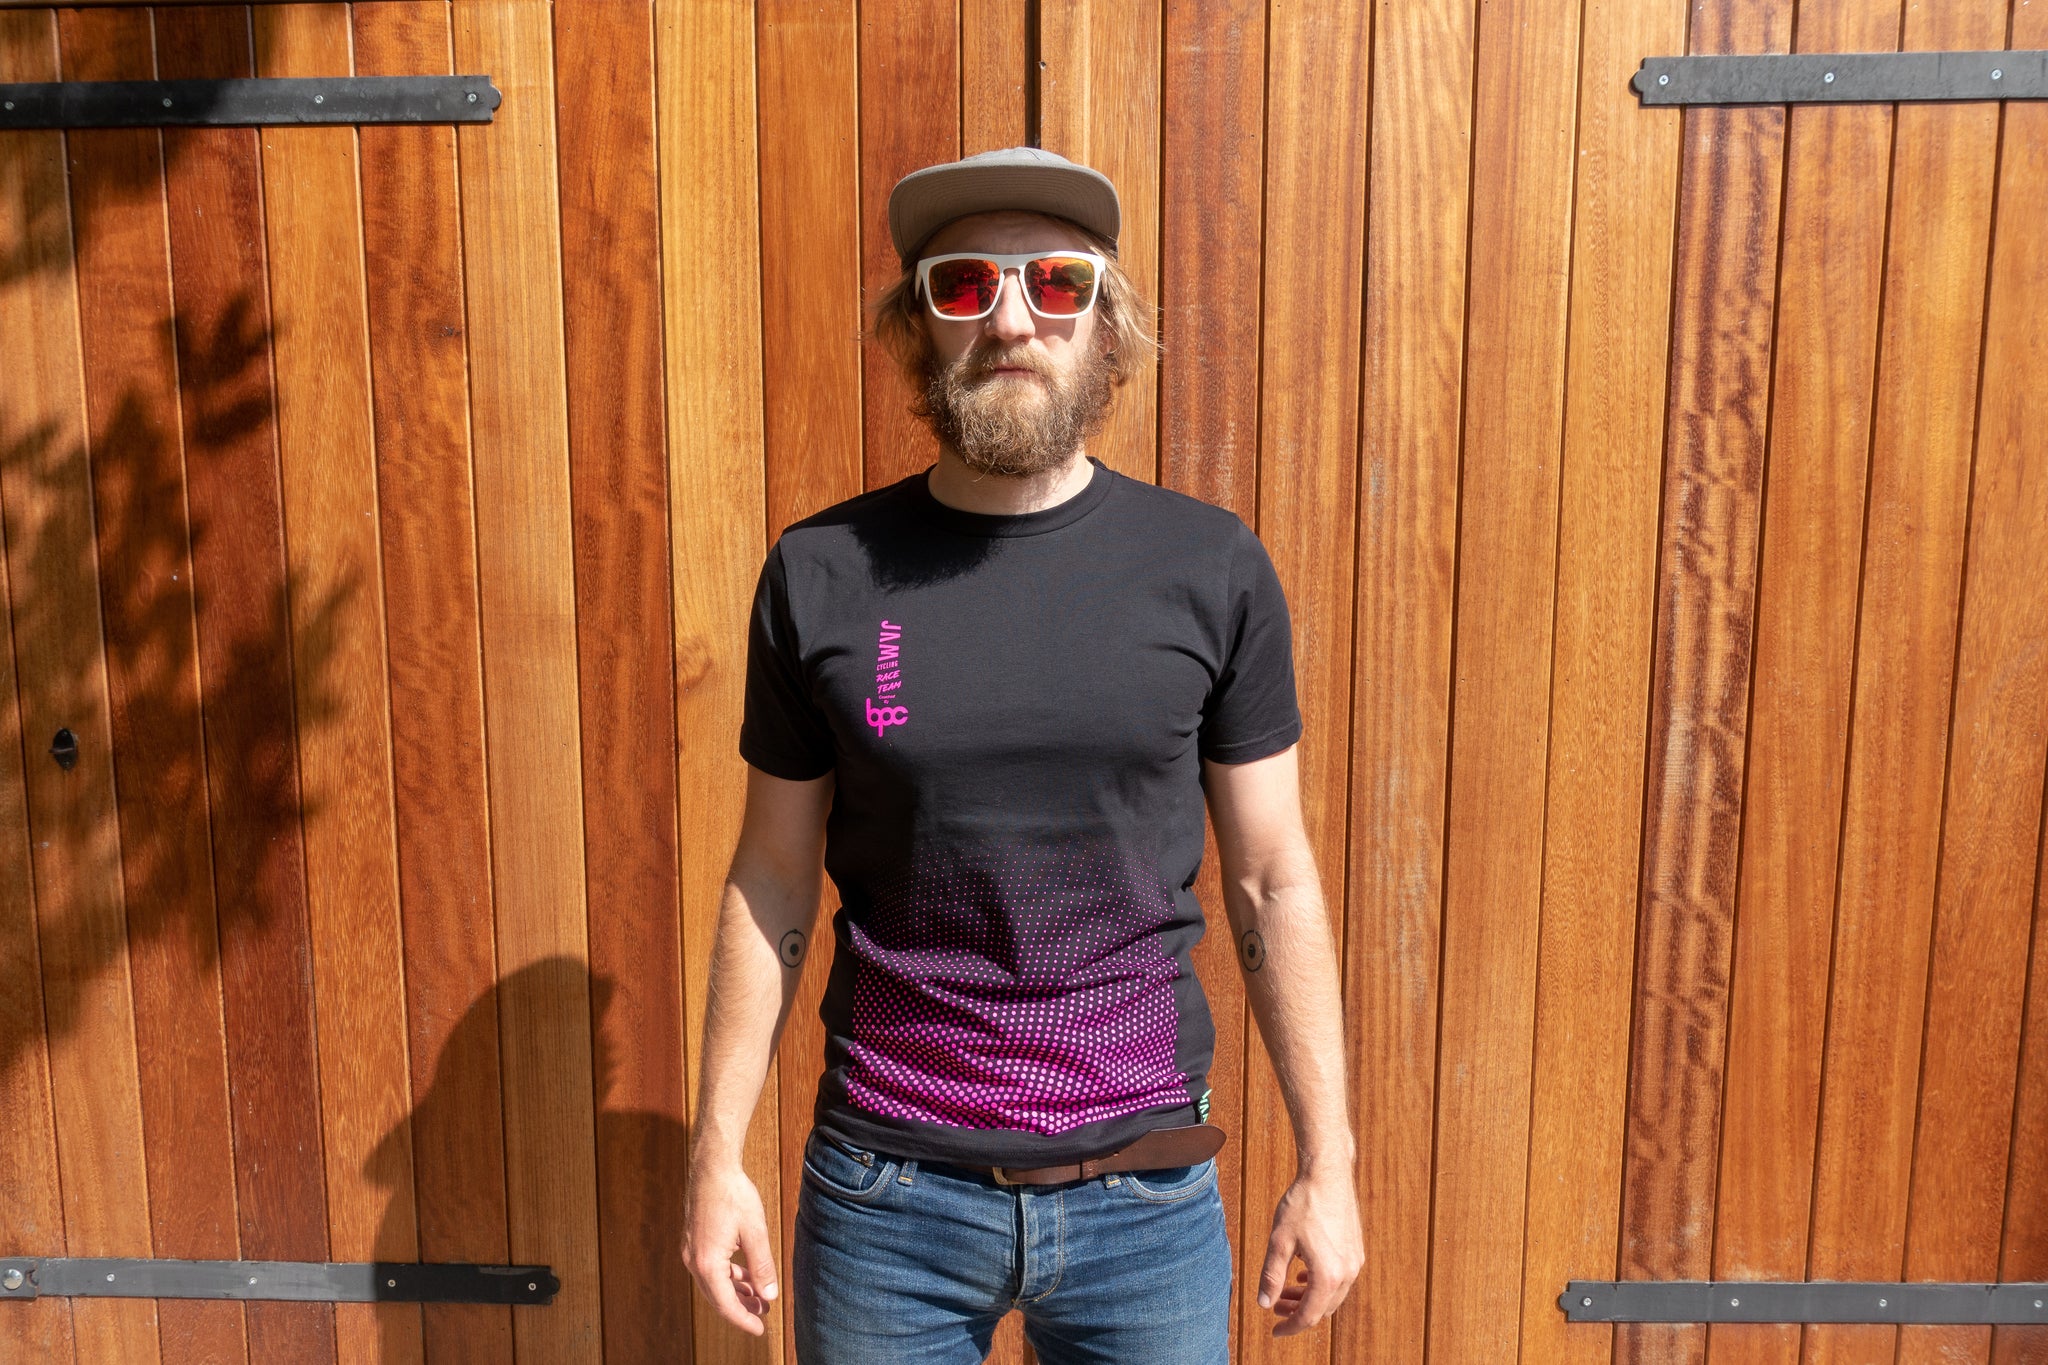 JAM Race team t-shirt featuring HOT pink dotted pattern worn by Jam CEO  against barn door